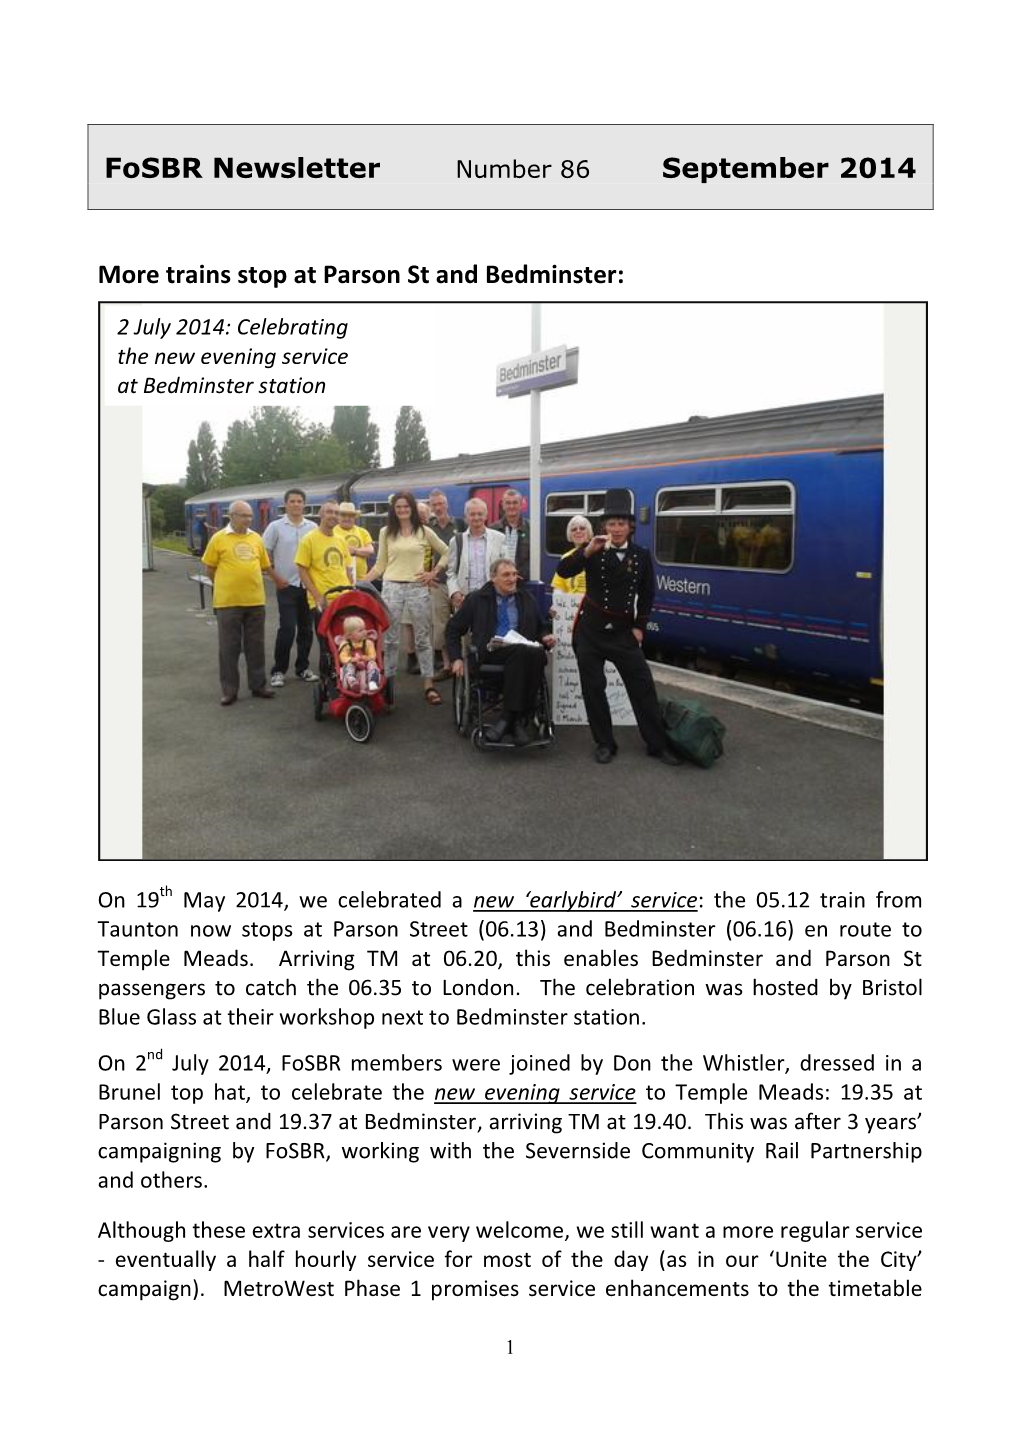 Fosbr Newsletter September 2014 More Trains Stop at Parson St And